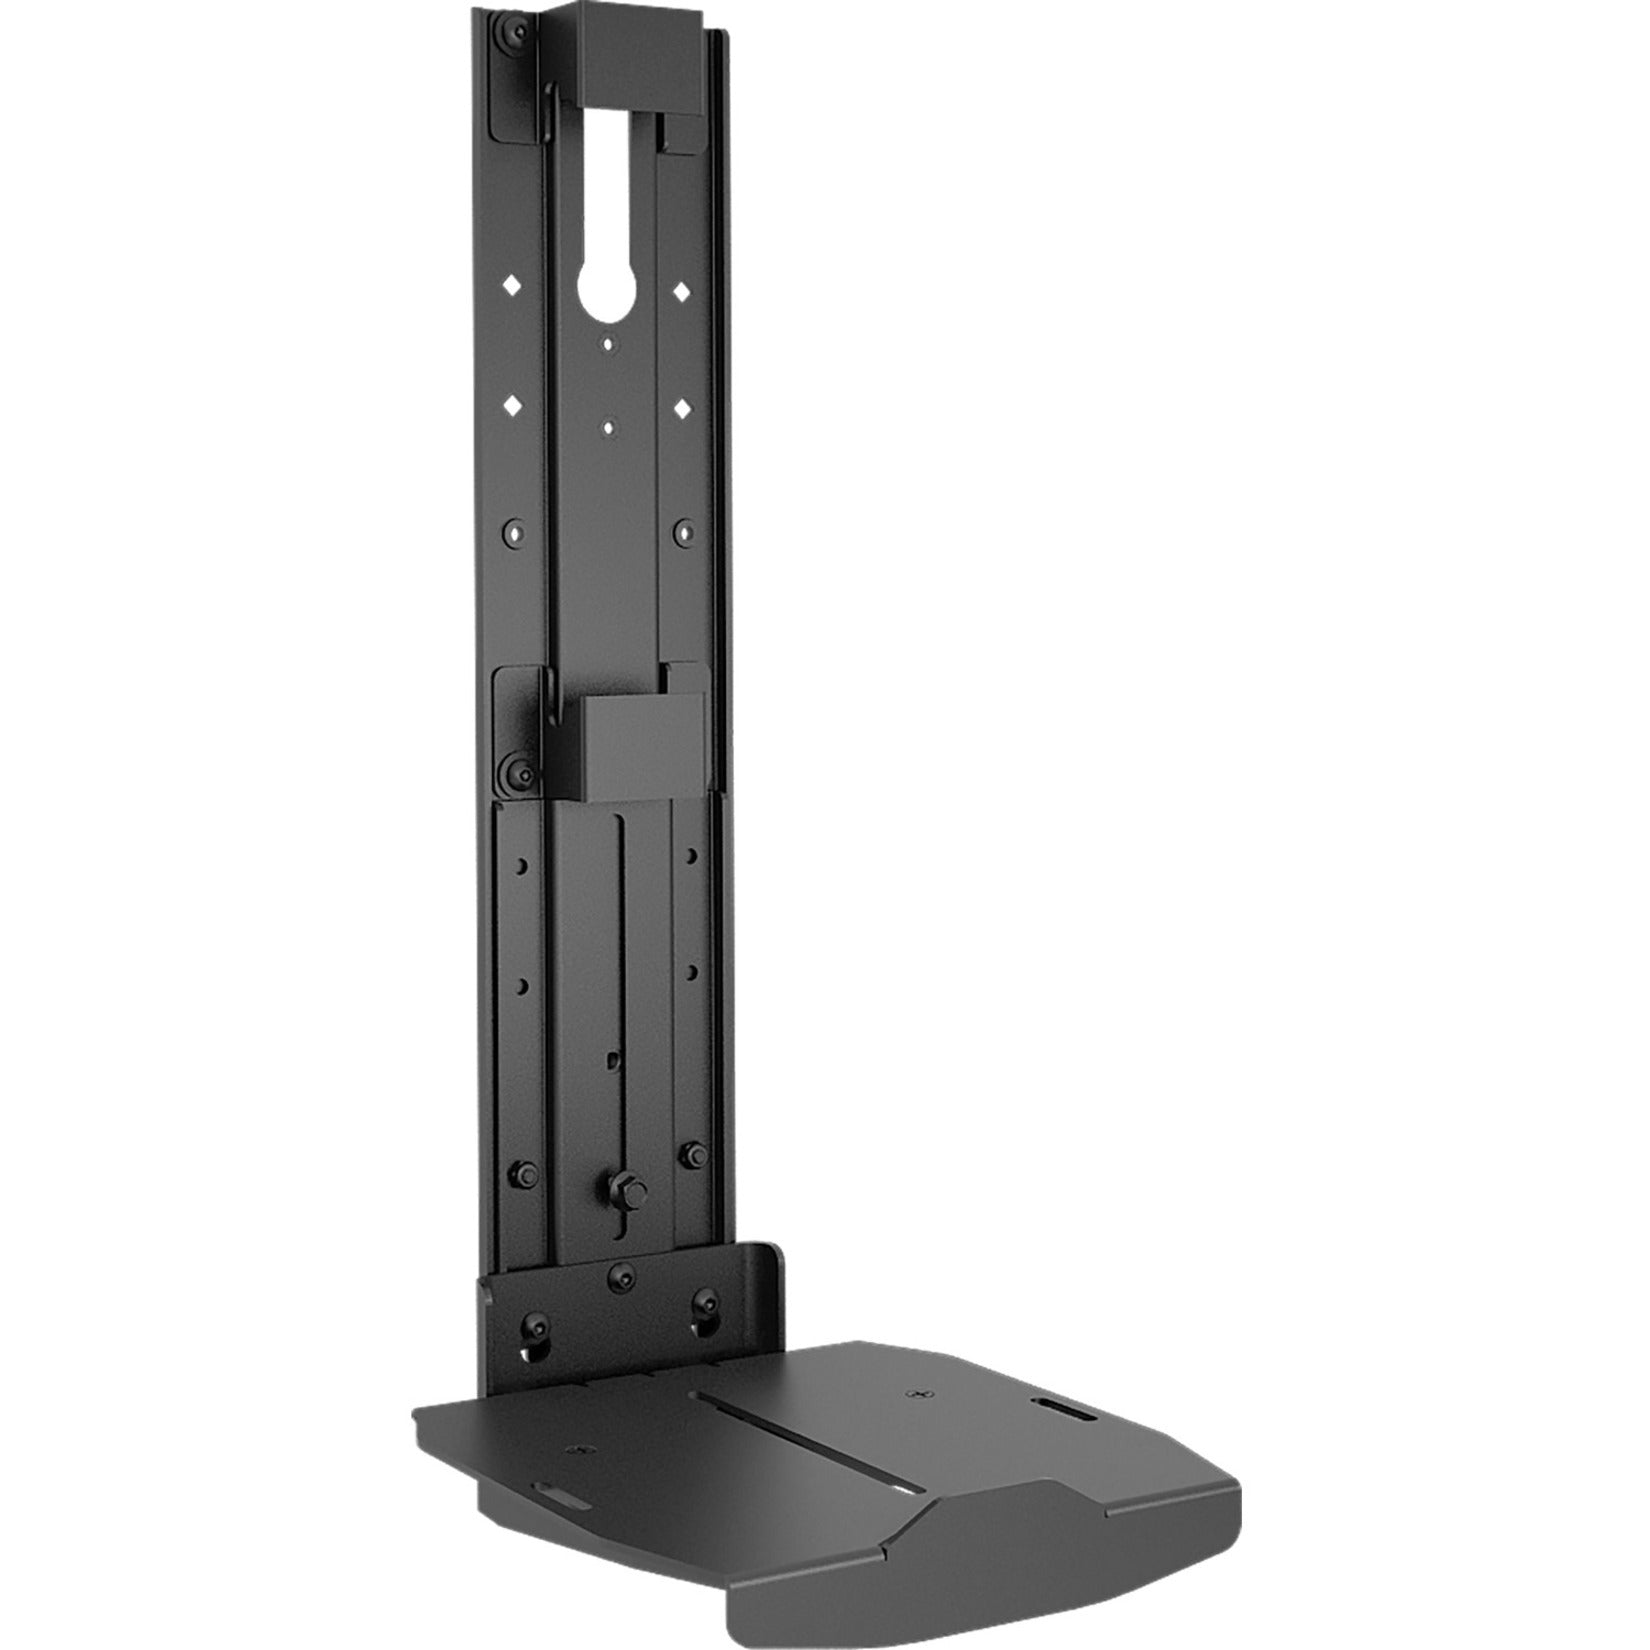 Chief FCA800 Fusion Mounting Shelf for A/V Equipment, Flat Panel Display, Video Conferencing System - Black, TAA Compliant